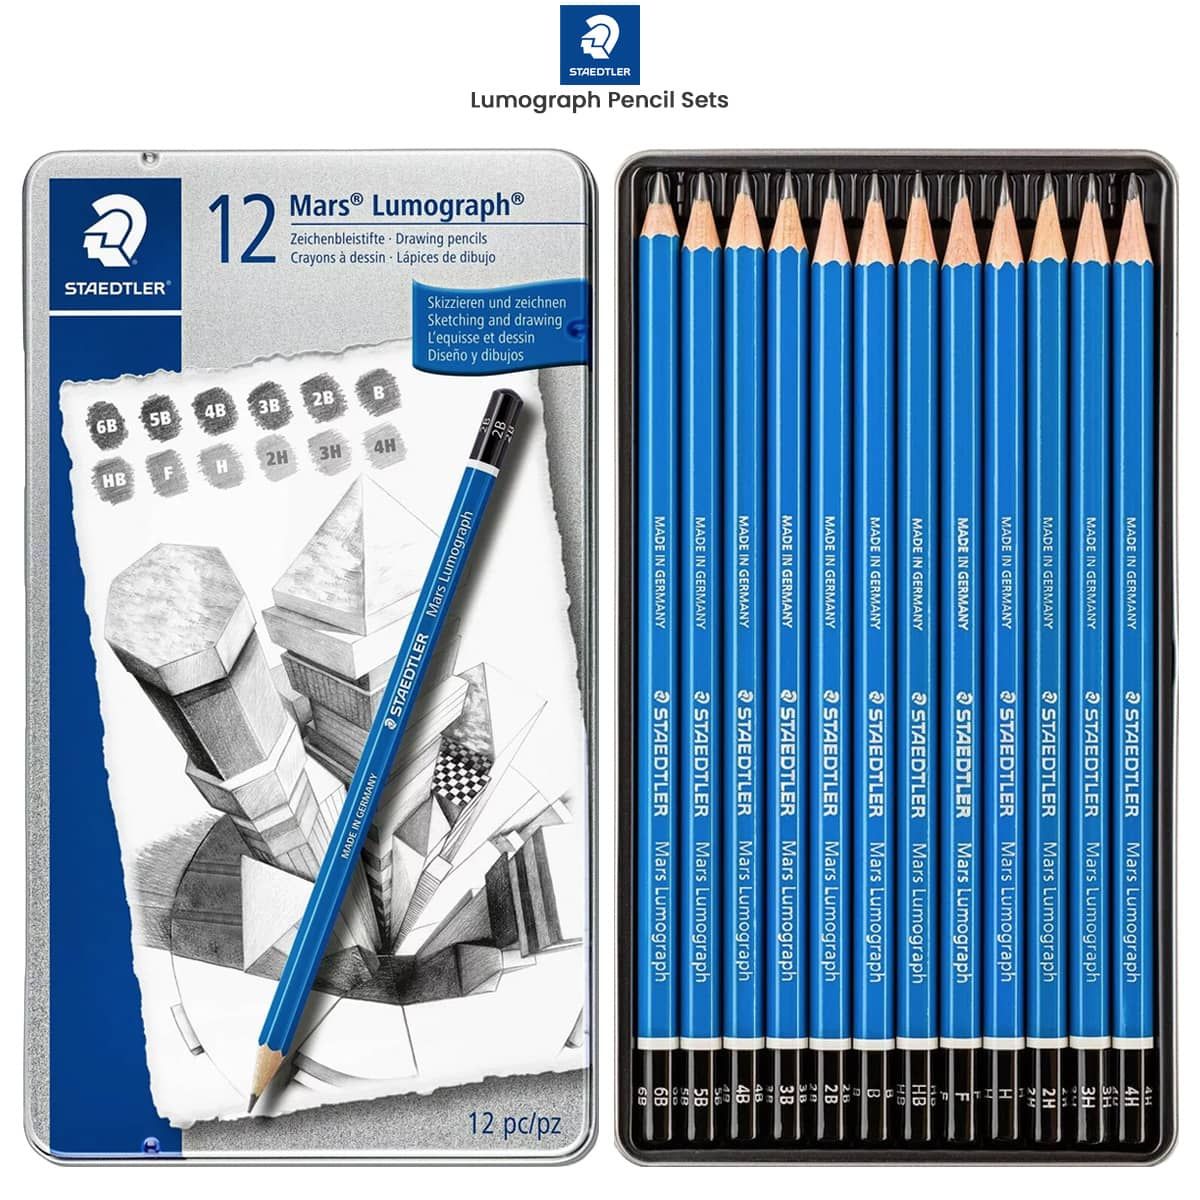 Drawing Pencils, 38 Pcs Art Supplies Sketching Pencils Set with Graphite  Pencils Charcoal Pencils Dual Ended Color Pencils for Beginners